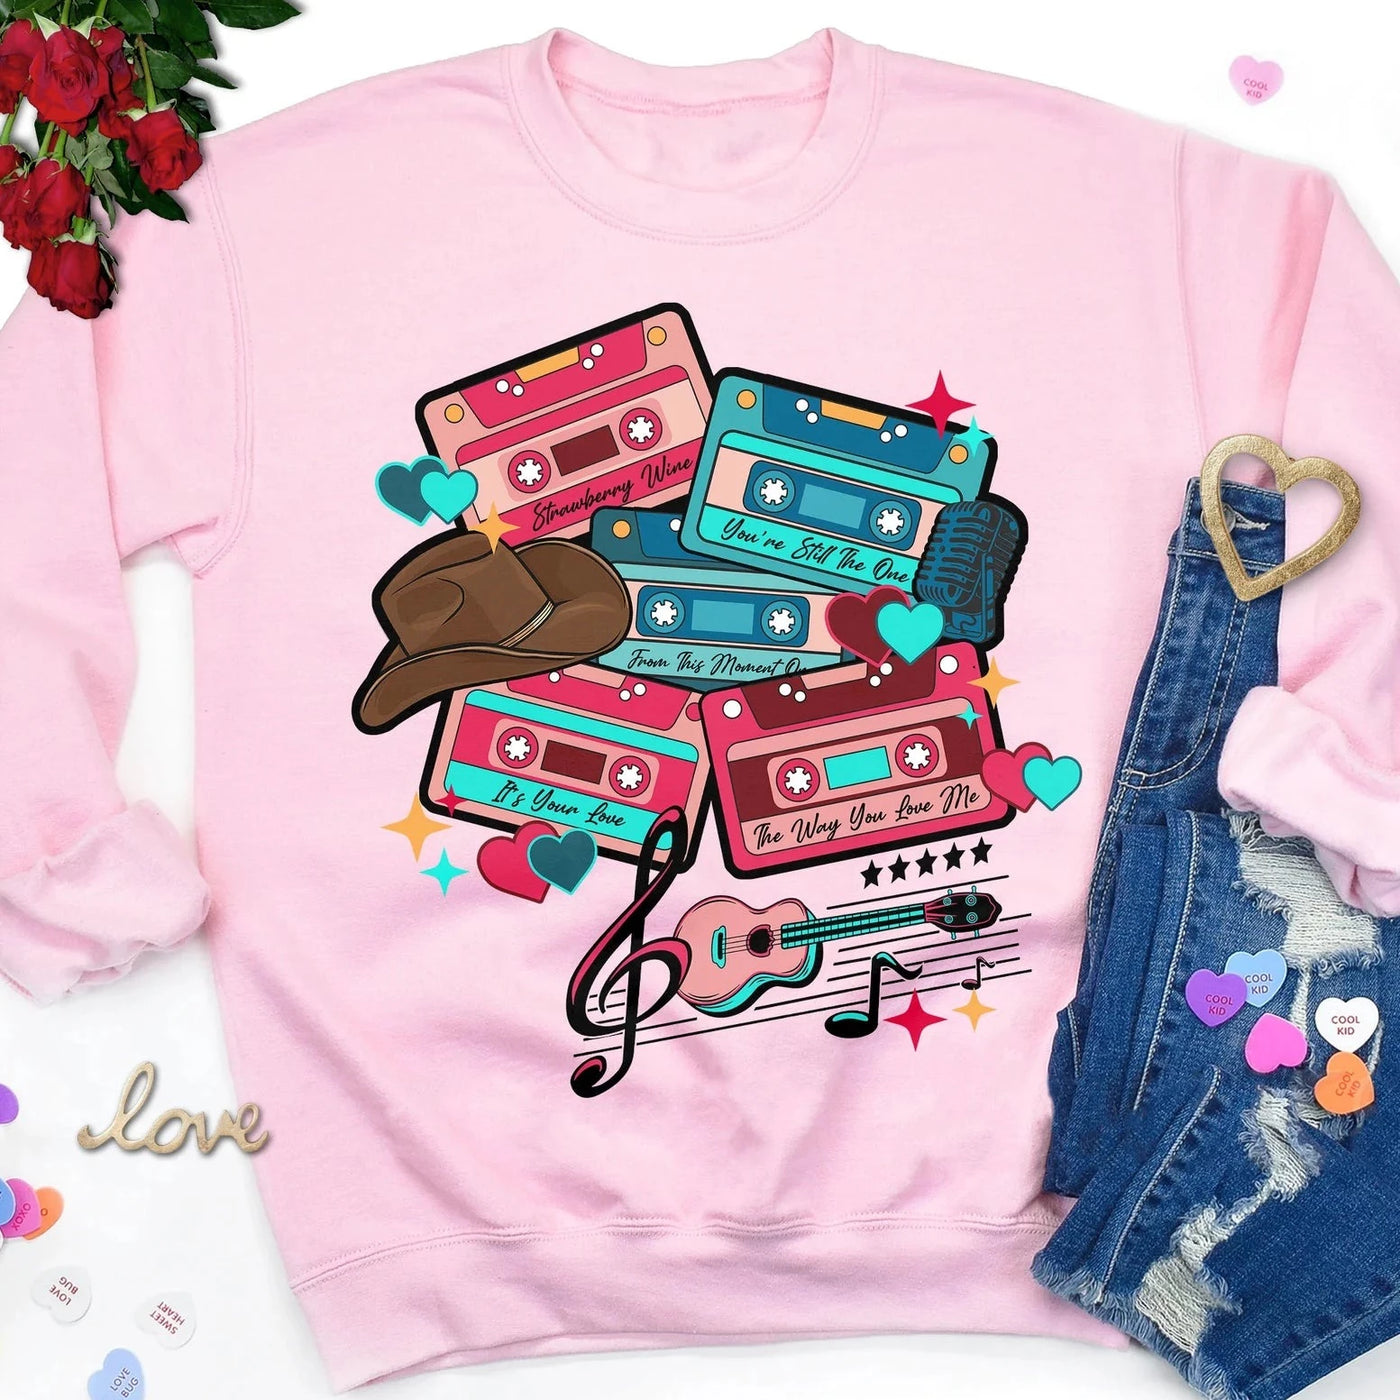 "Country Love Song Cassette Tapes" Sweatshirt or T-shirt (shown on "Pink")